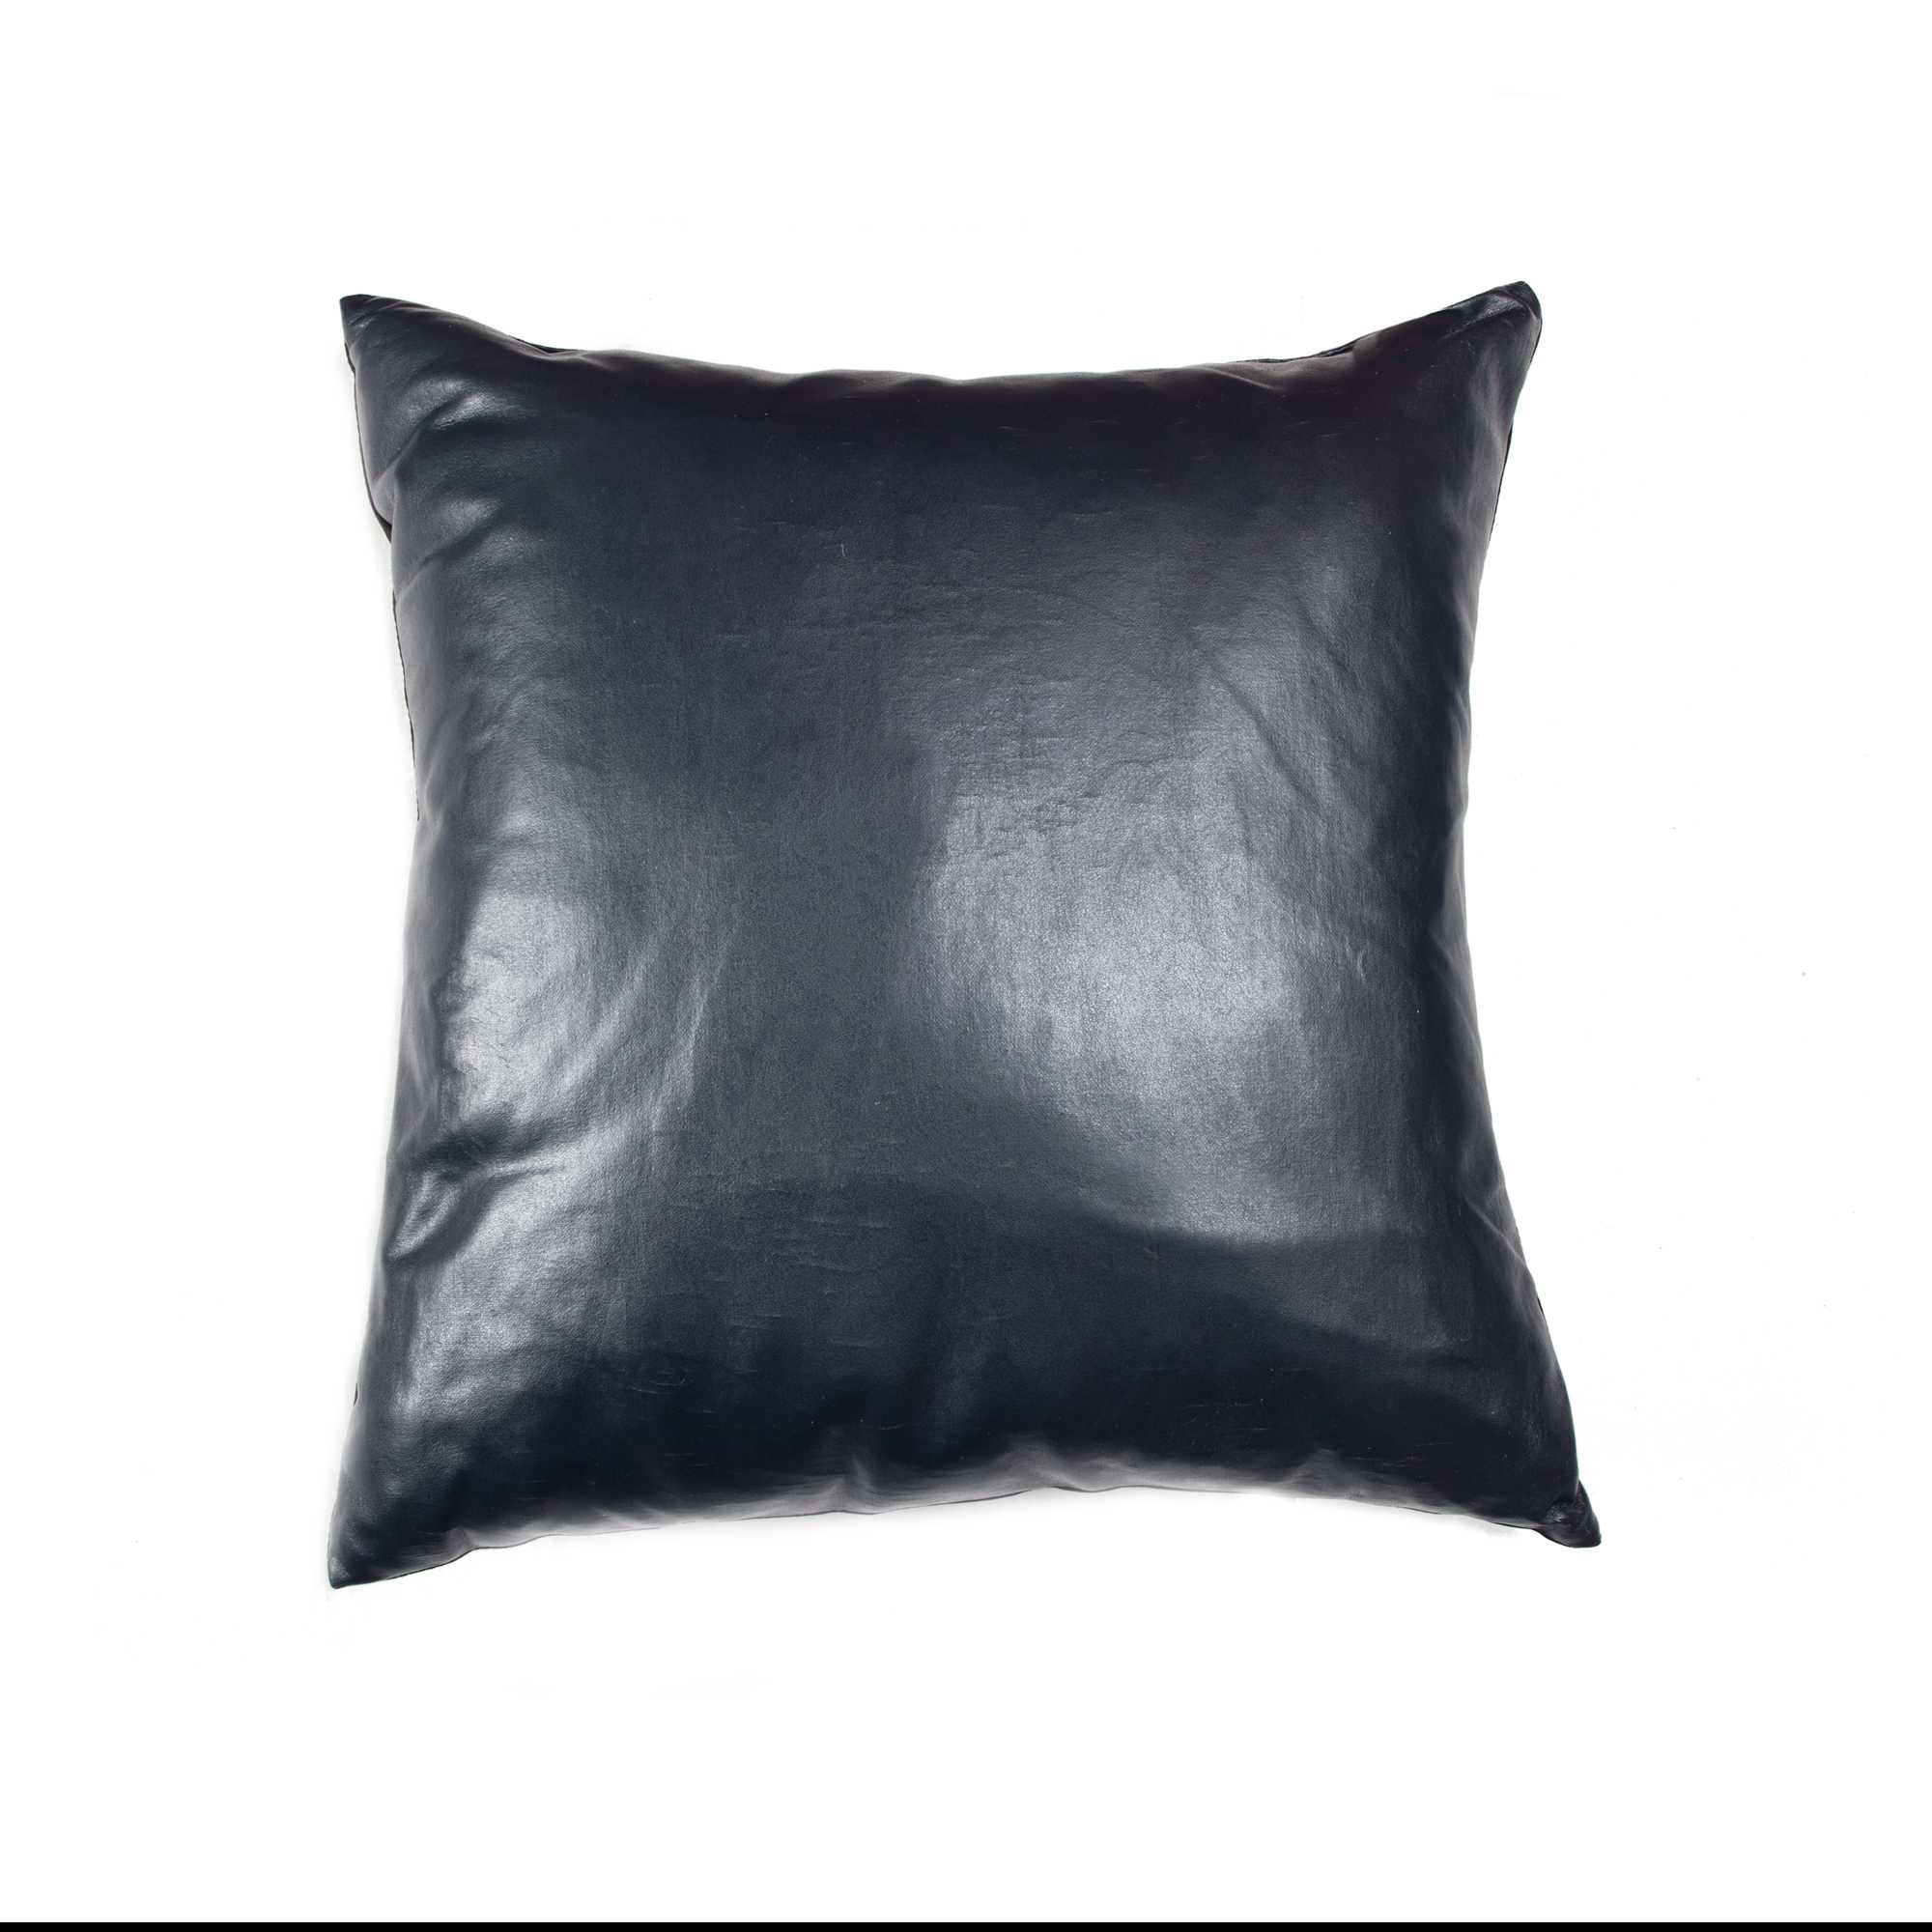 16" x 16" x 5" Navy Cowhide Leather - Pillow